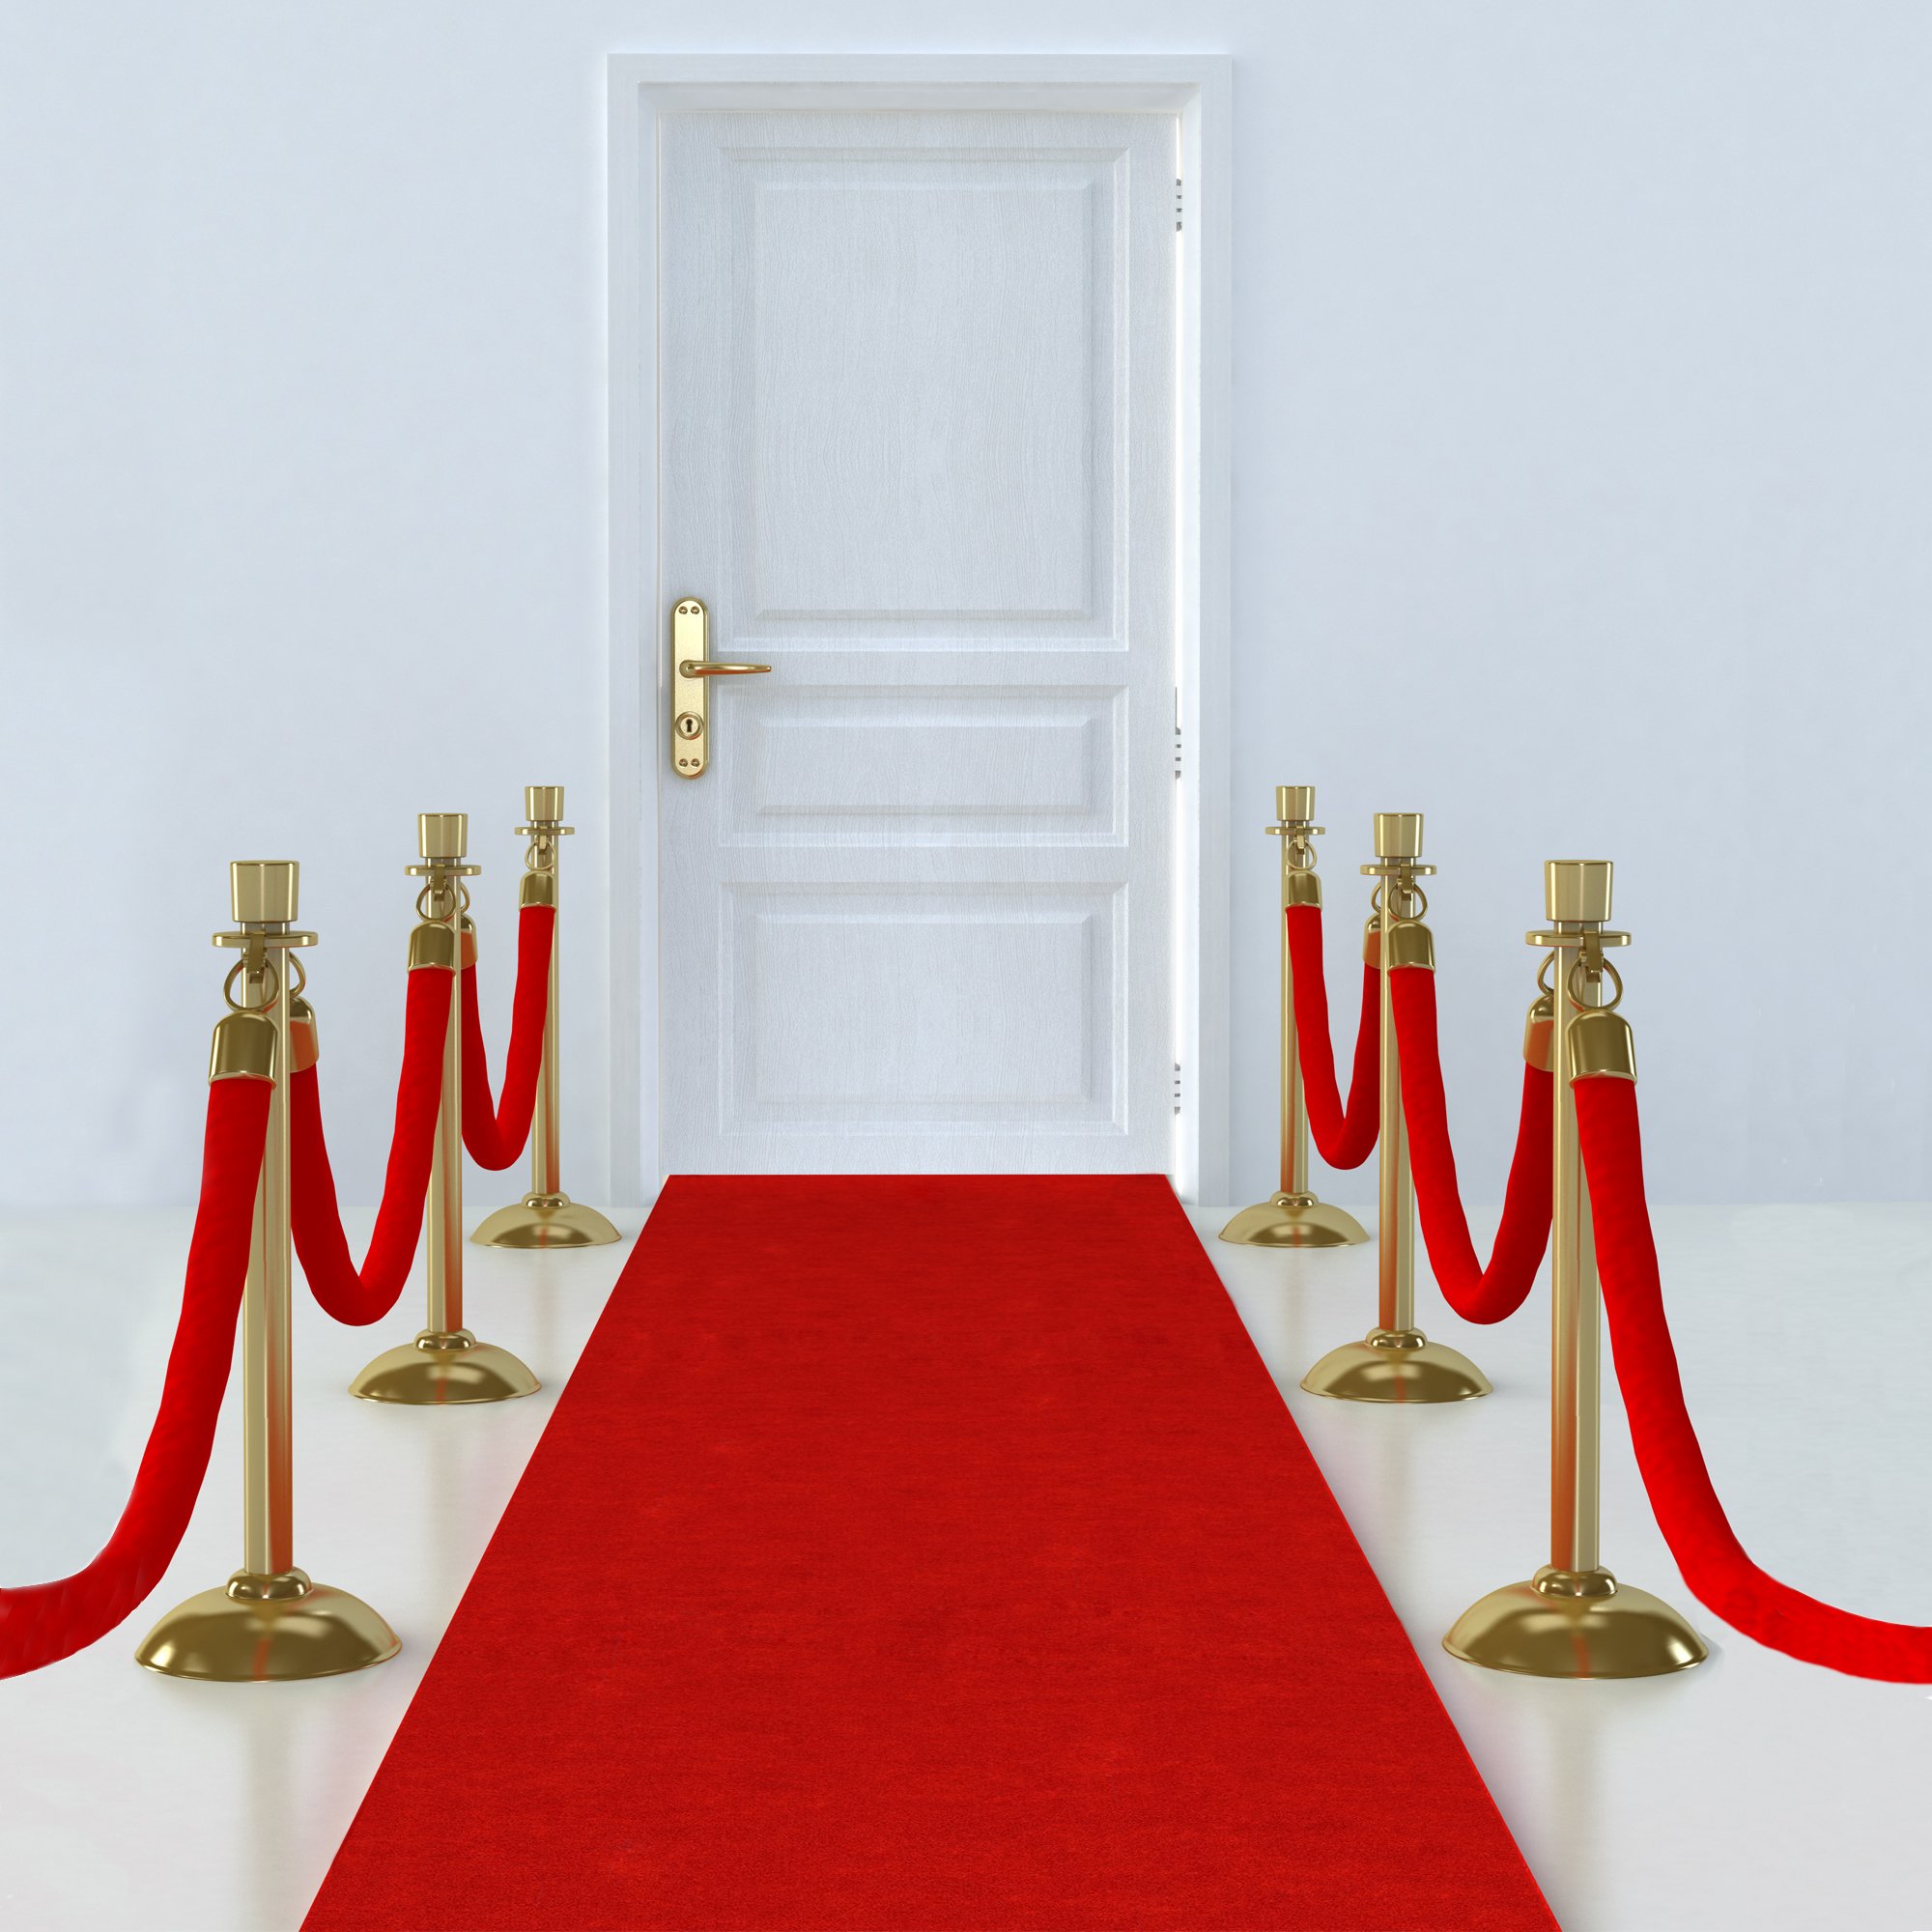 1m x 4m Red Carpet Runner Rug TRP Rubber Party Decor Hollywood Wedding Aisle 